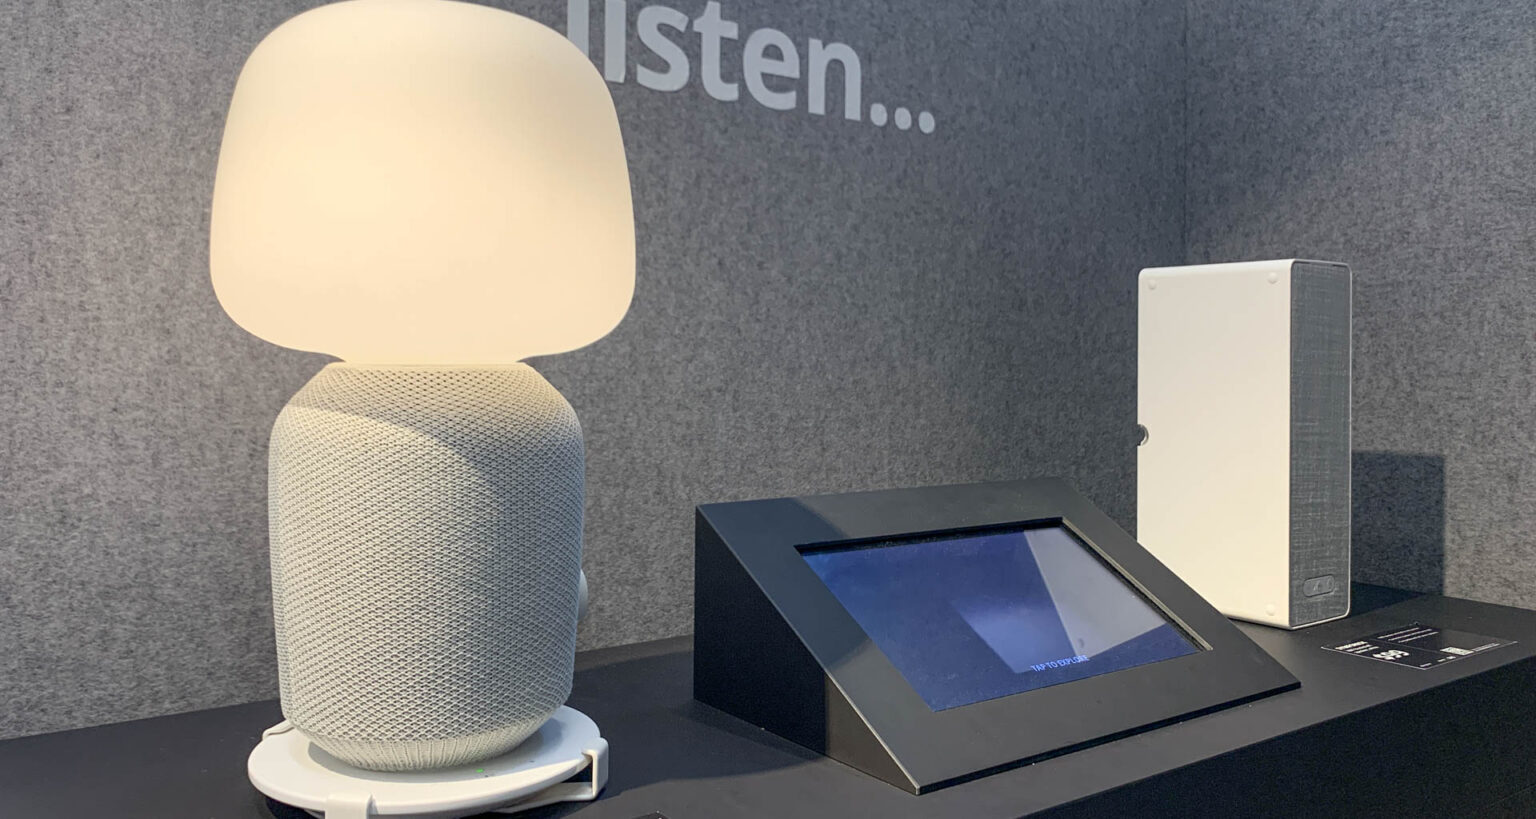 IKEA Symfonisk speakers, developed with Sonos, are in IKEA stores now. Image: Digitized House.